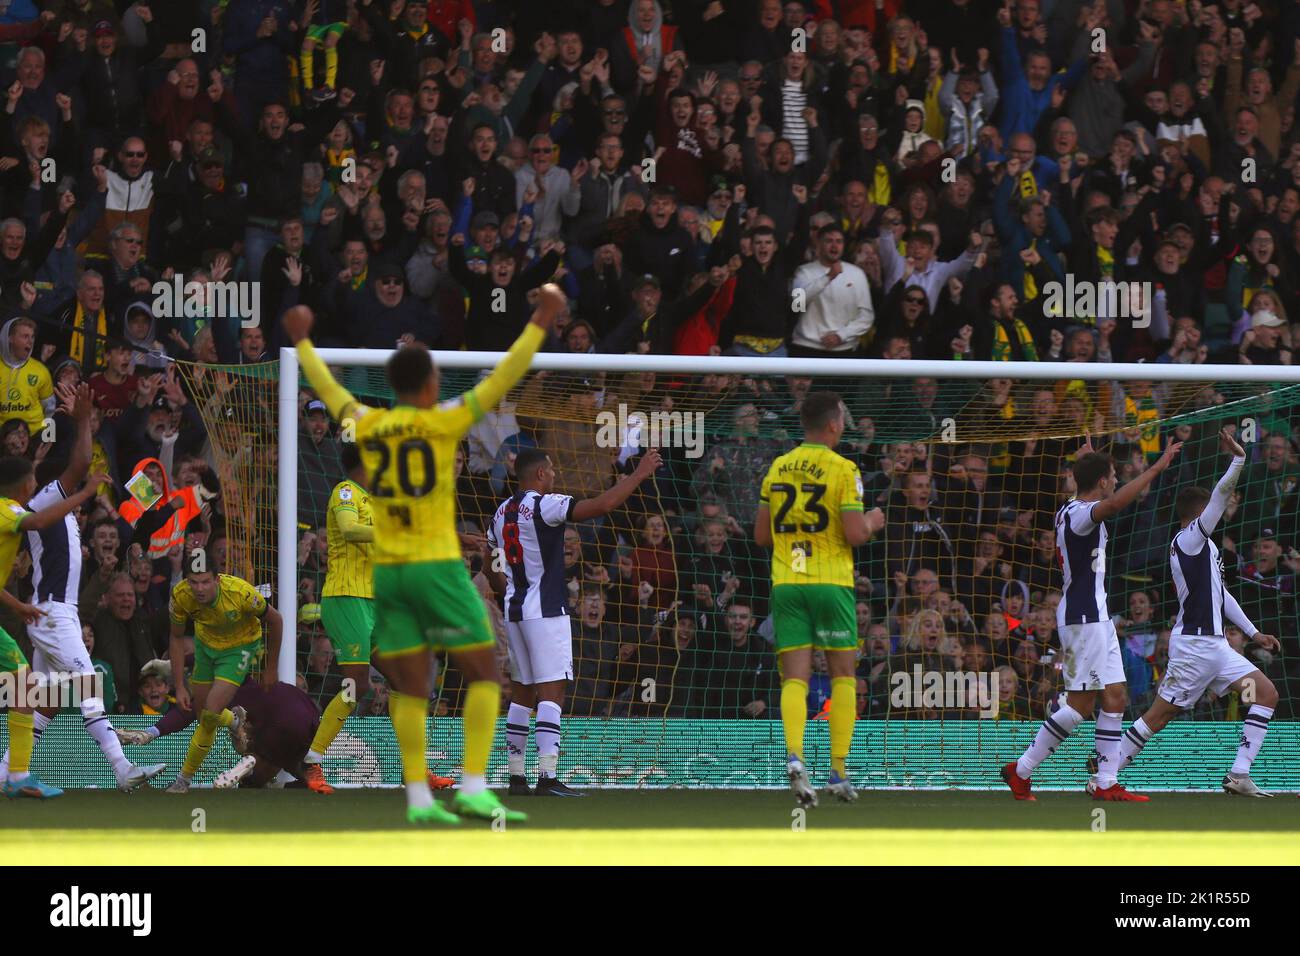 Sam Byram of Norwich City celebrates after scoring an equalising goal to make it 1-1 - Norwich City v West Bromwich Albion, Sky Bet Championship, Carrow Road, Norwich, UK - 17th September 2022  Editorial Use Only - DataCo restrictions apply Stock Photo